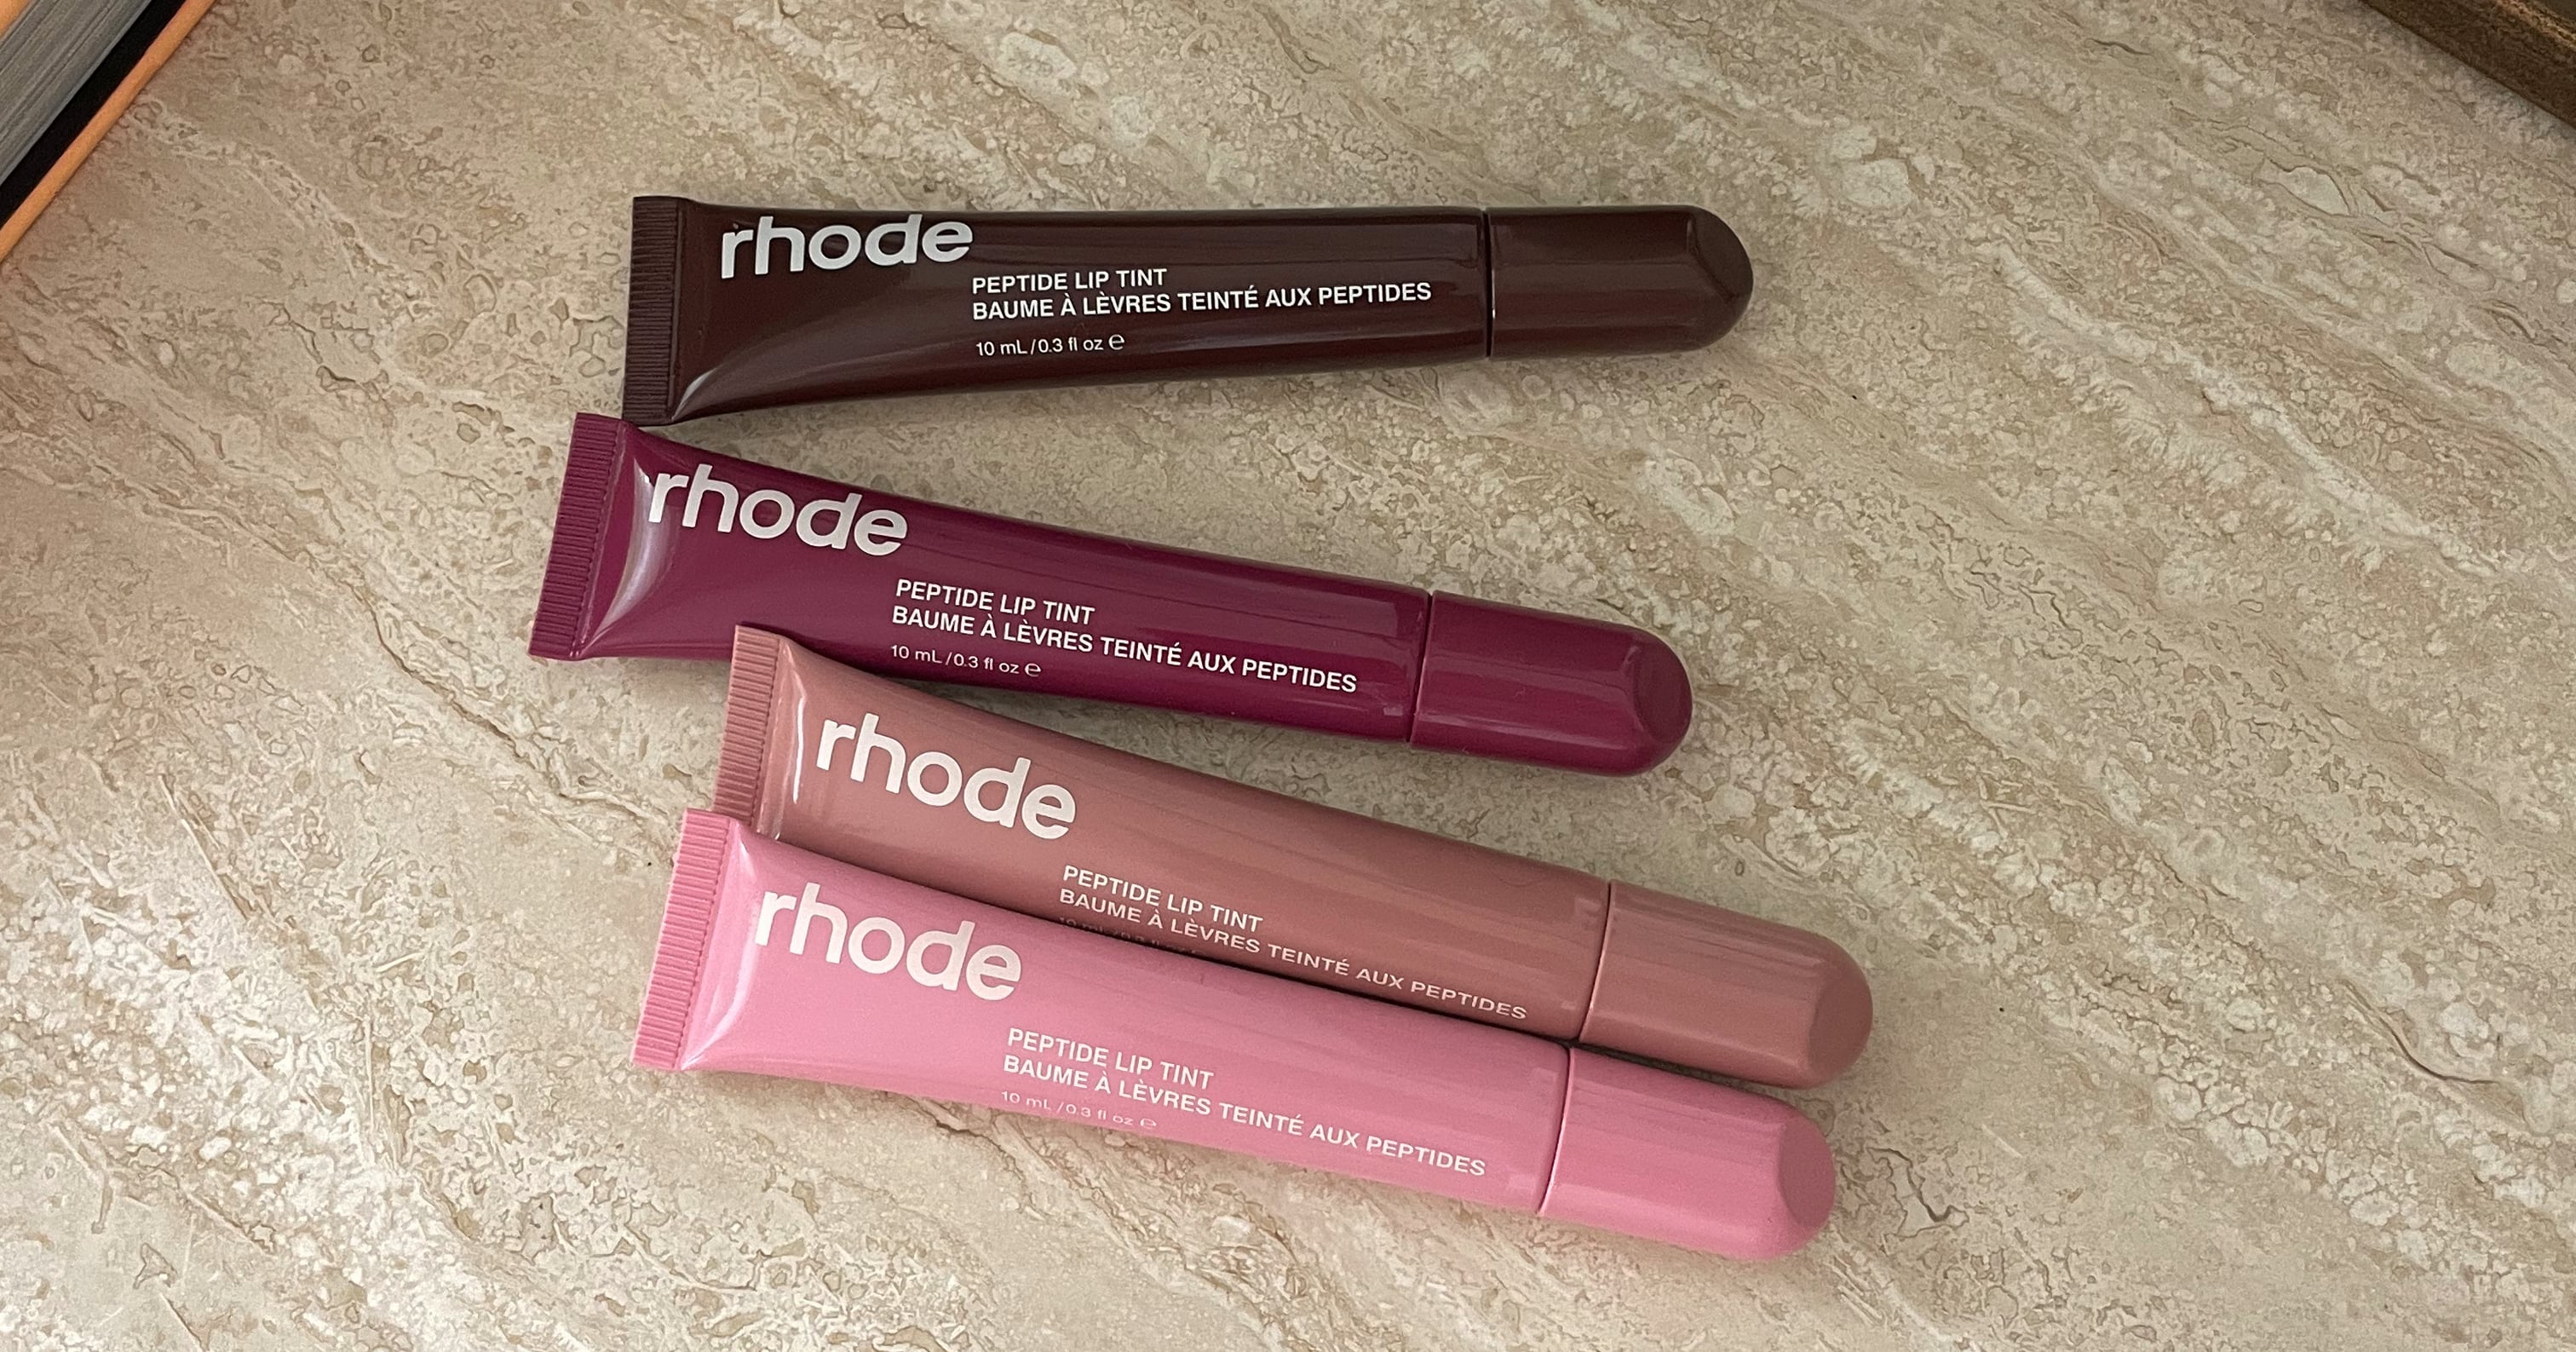 Rhode Peptide Lip Treatment Review With Photos